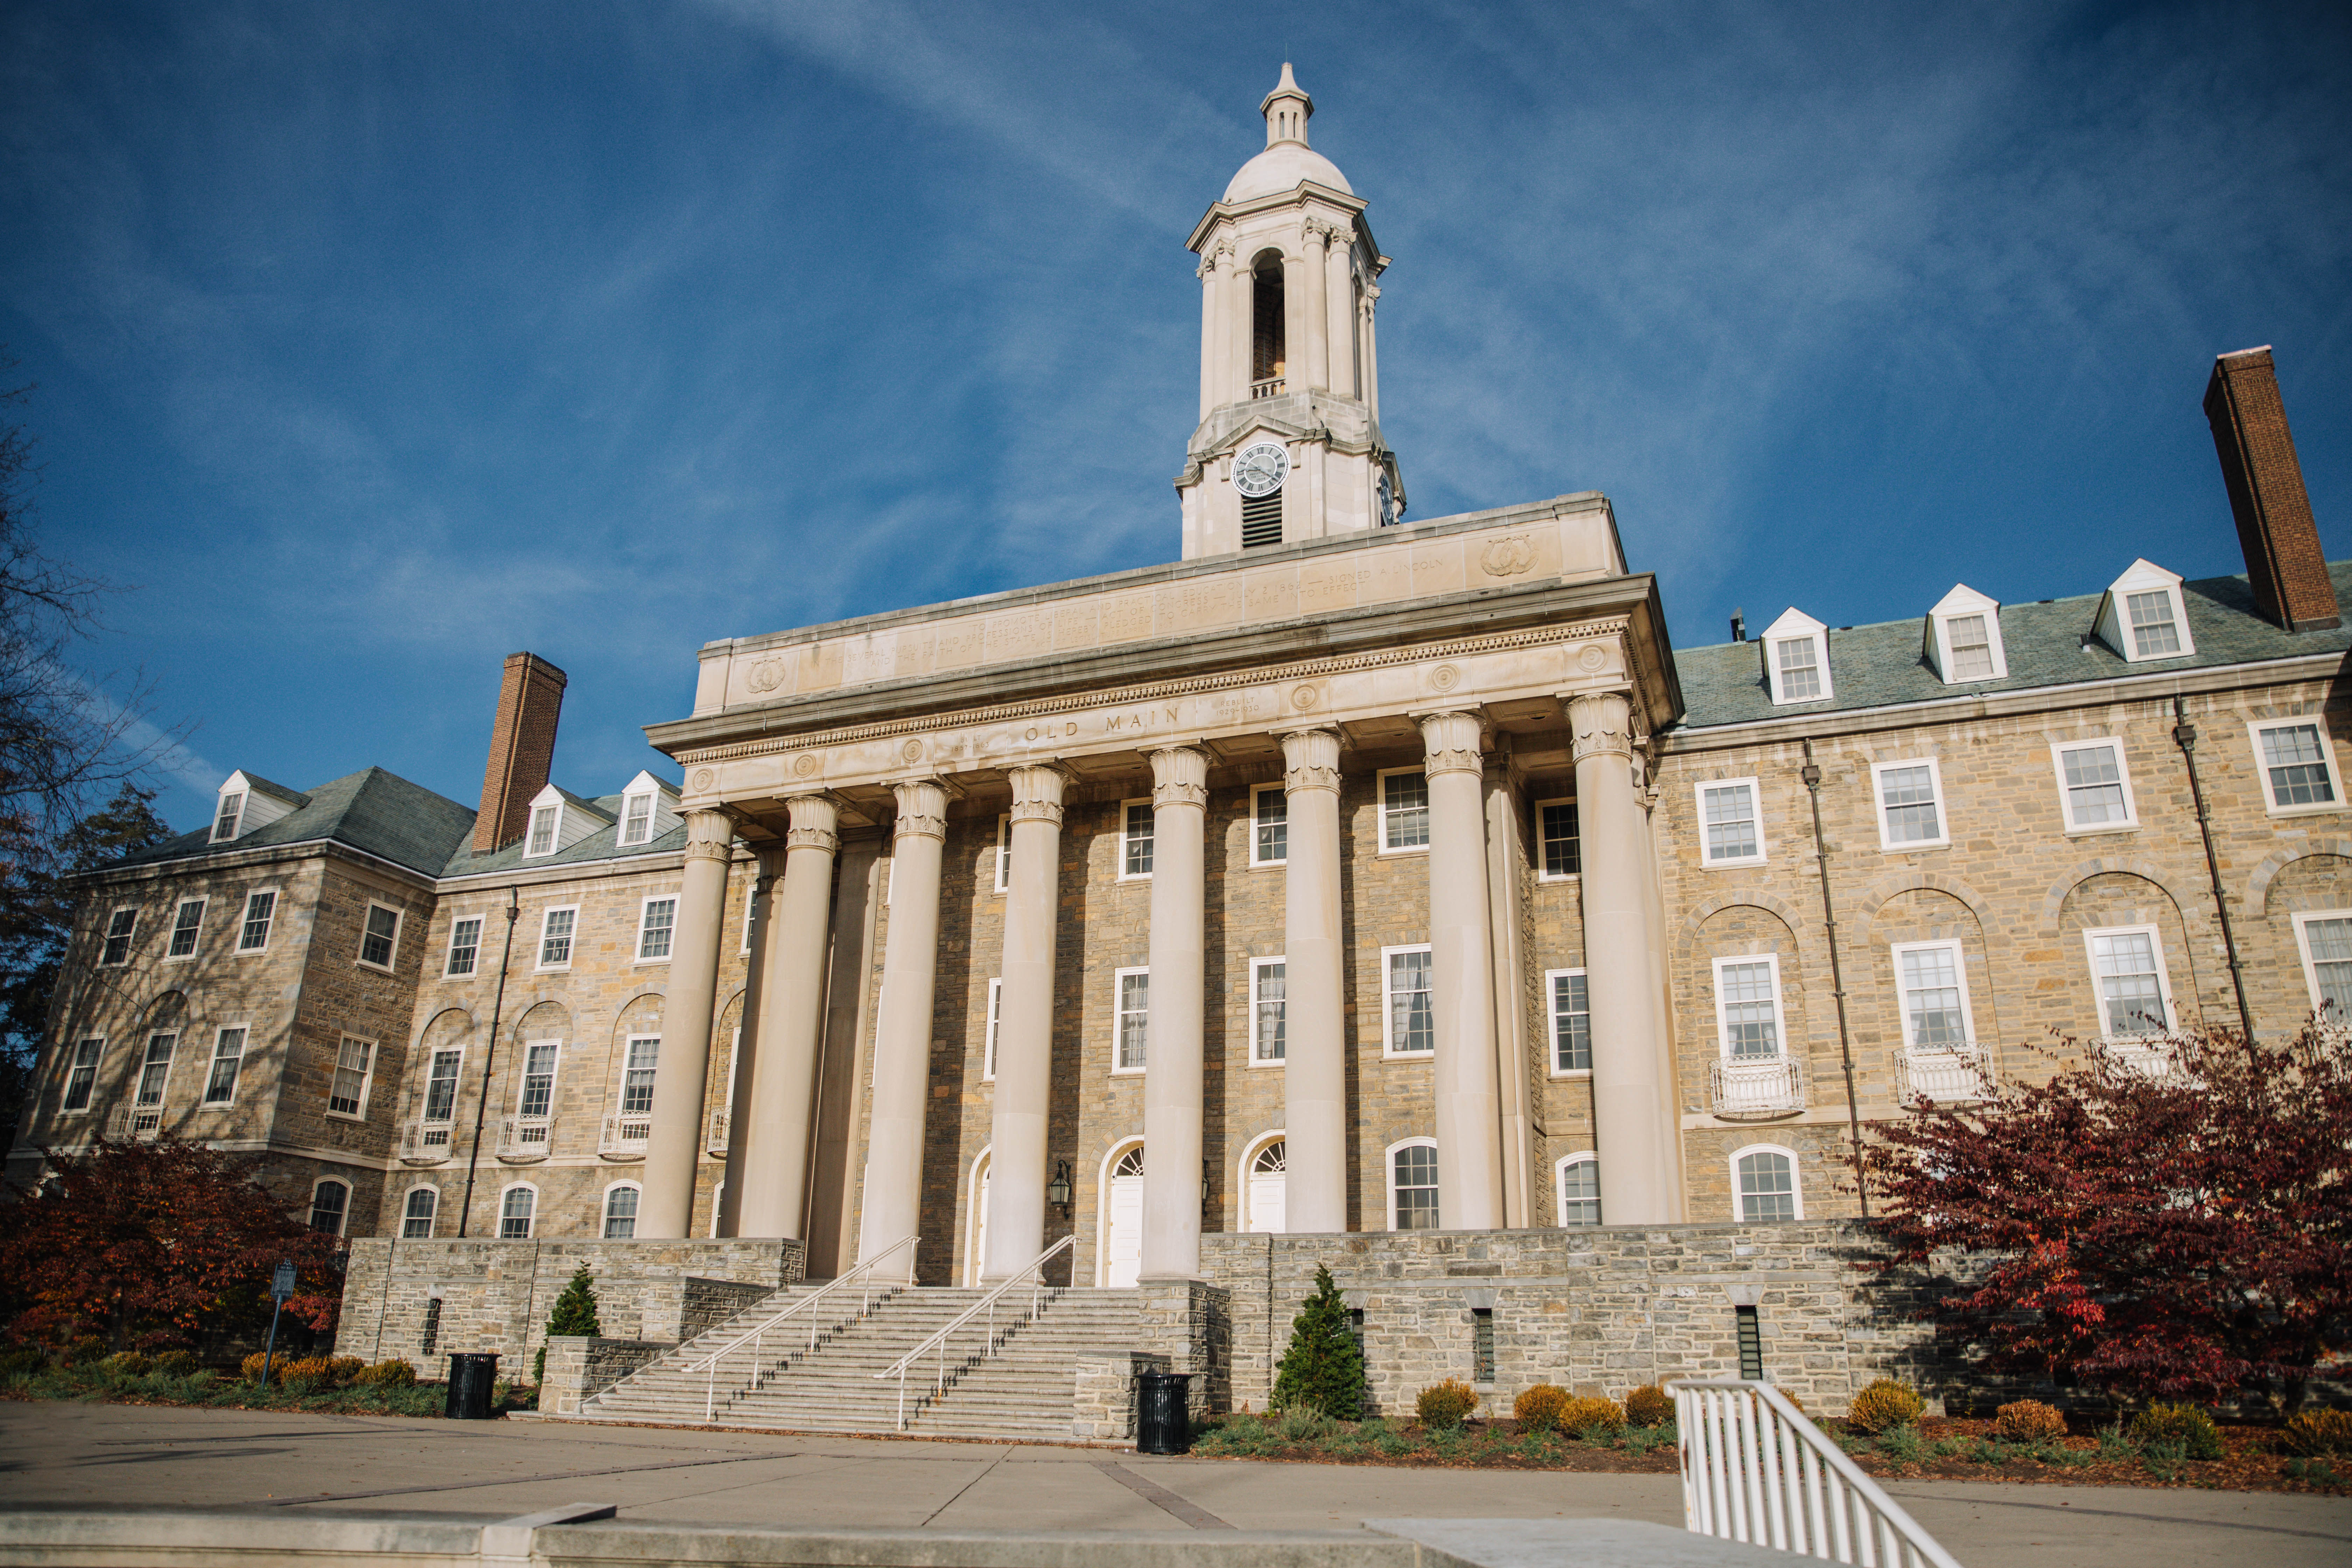 Bestuiven openbaring Mogelijk Penn State professors, students raise concerns about a proposal to merge  its law schools